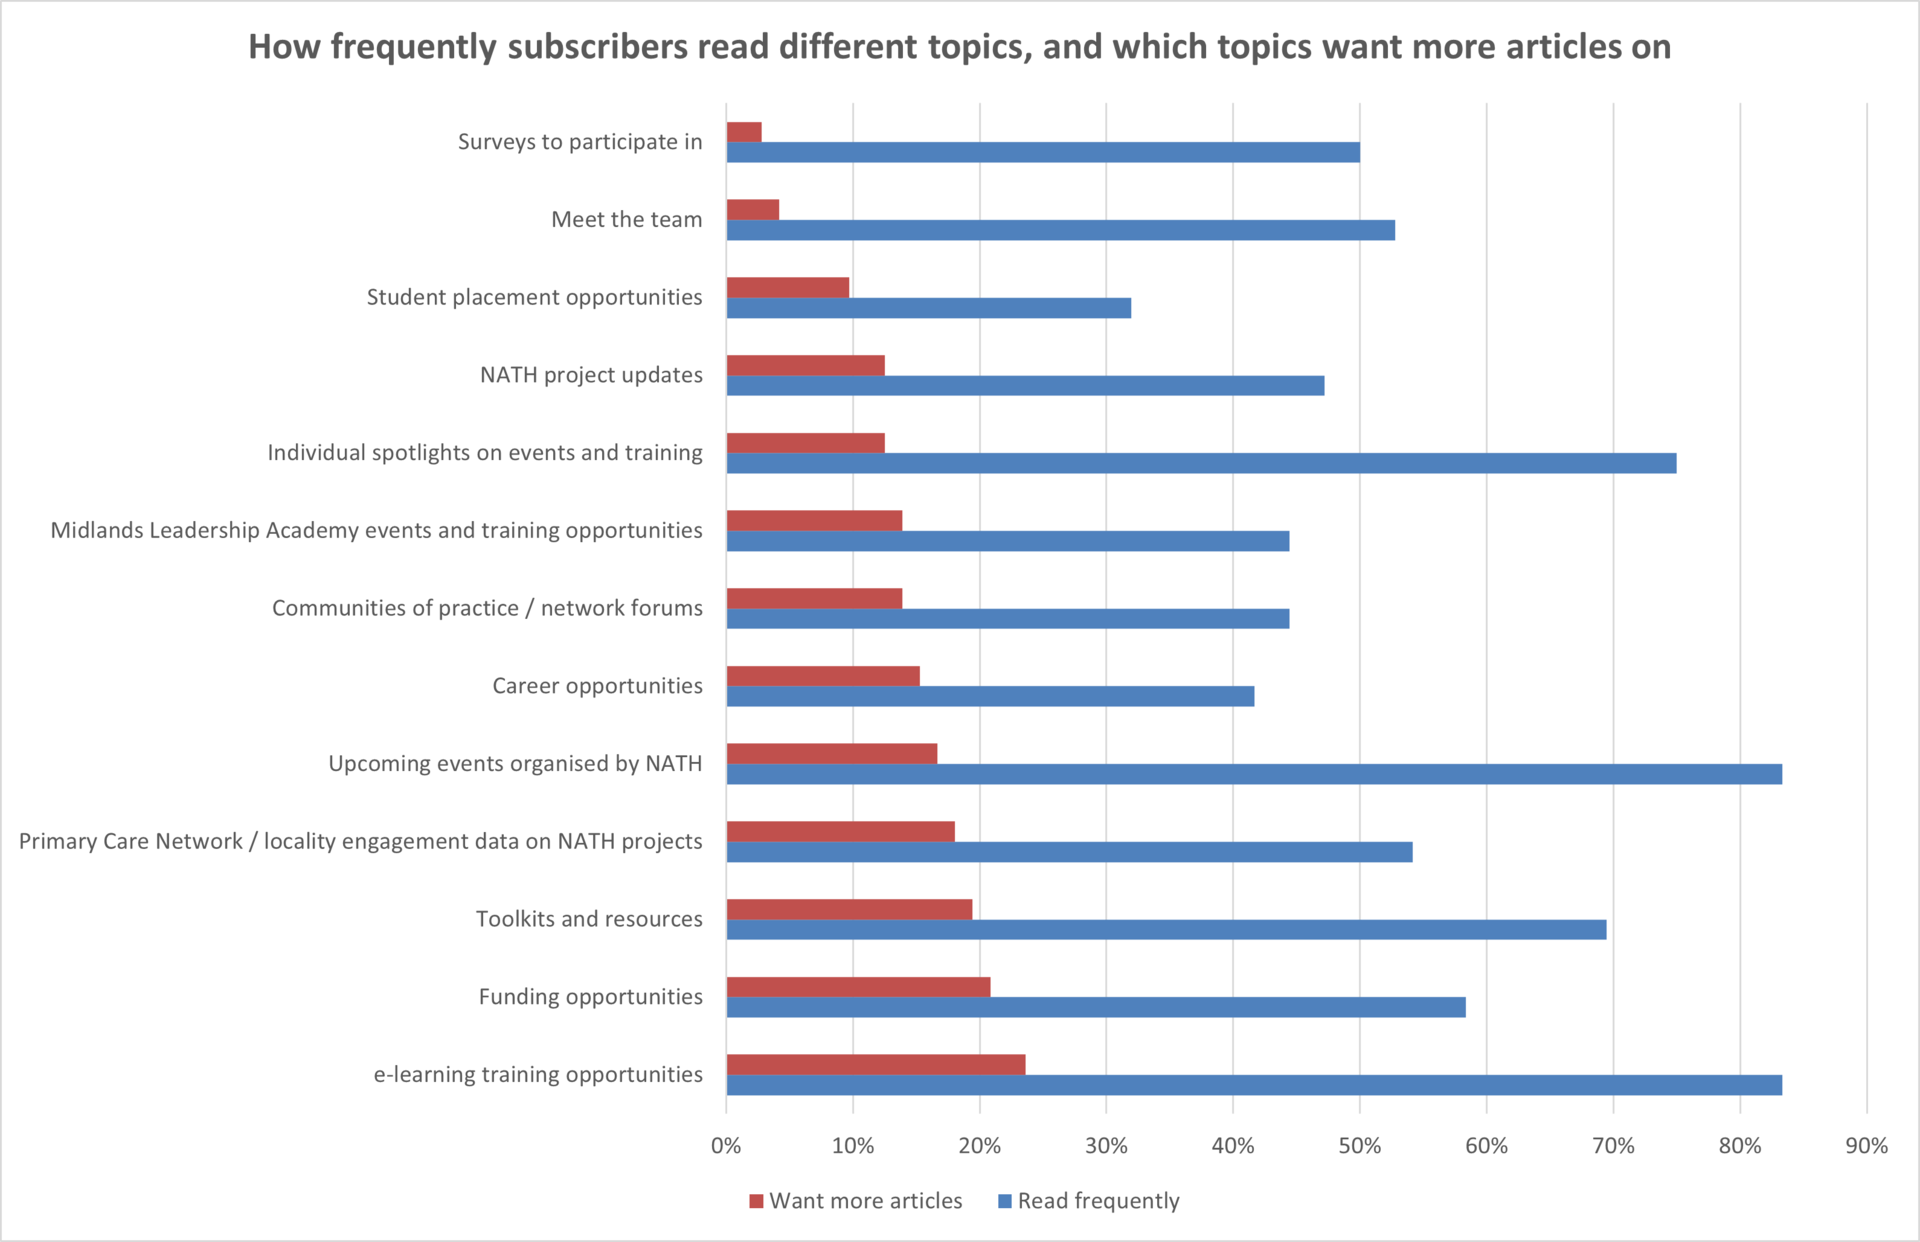 How frequently subscribers read different topics, and which topics want more articles on. Read frequently: e-learning 83%, funding 58%, toolkits and resources 69%, engagement on NATH projects 54%, upcoming NATH events 83%, career opportunities 42%, network forums 44%, Midlands Leadership Academy events 44%, event spotlights 75%, NATH project updates 47%, placements 32%, meet the team 53%, surveys 50%. Want more articles: e-learning 24%, funding 21%, toolkits and resources 19%, engagement on NATH projects 18%, upcoming NATH events 17%, career opportunities 15%, network forums 14%, Midlands Leadership Academy events 14%, event spotlights 13%, NATH project updates 13%, placements 10%, meet the team 4%, surveys 3%.